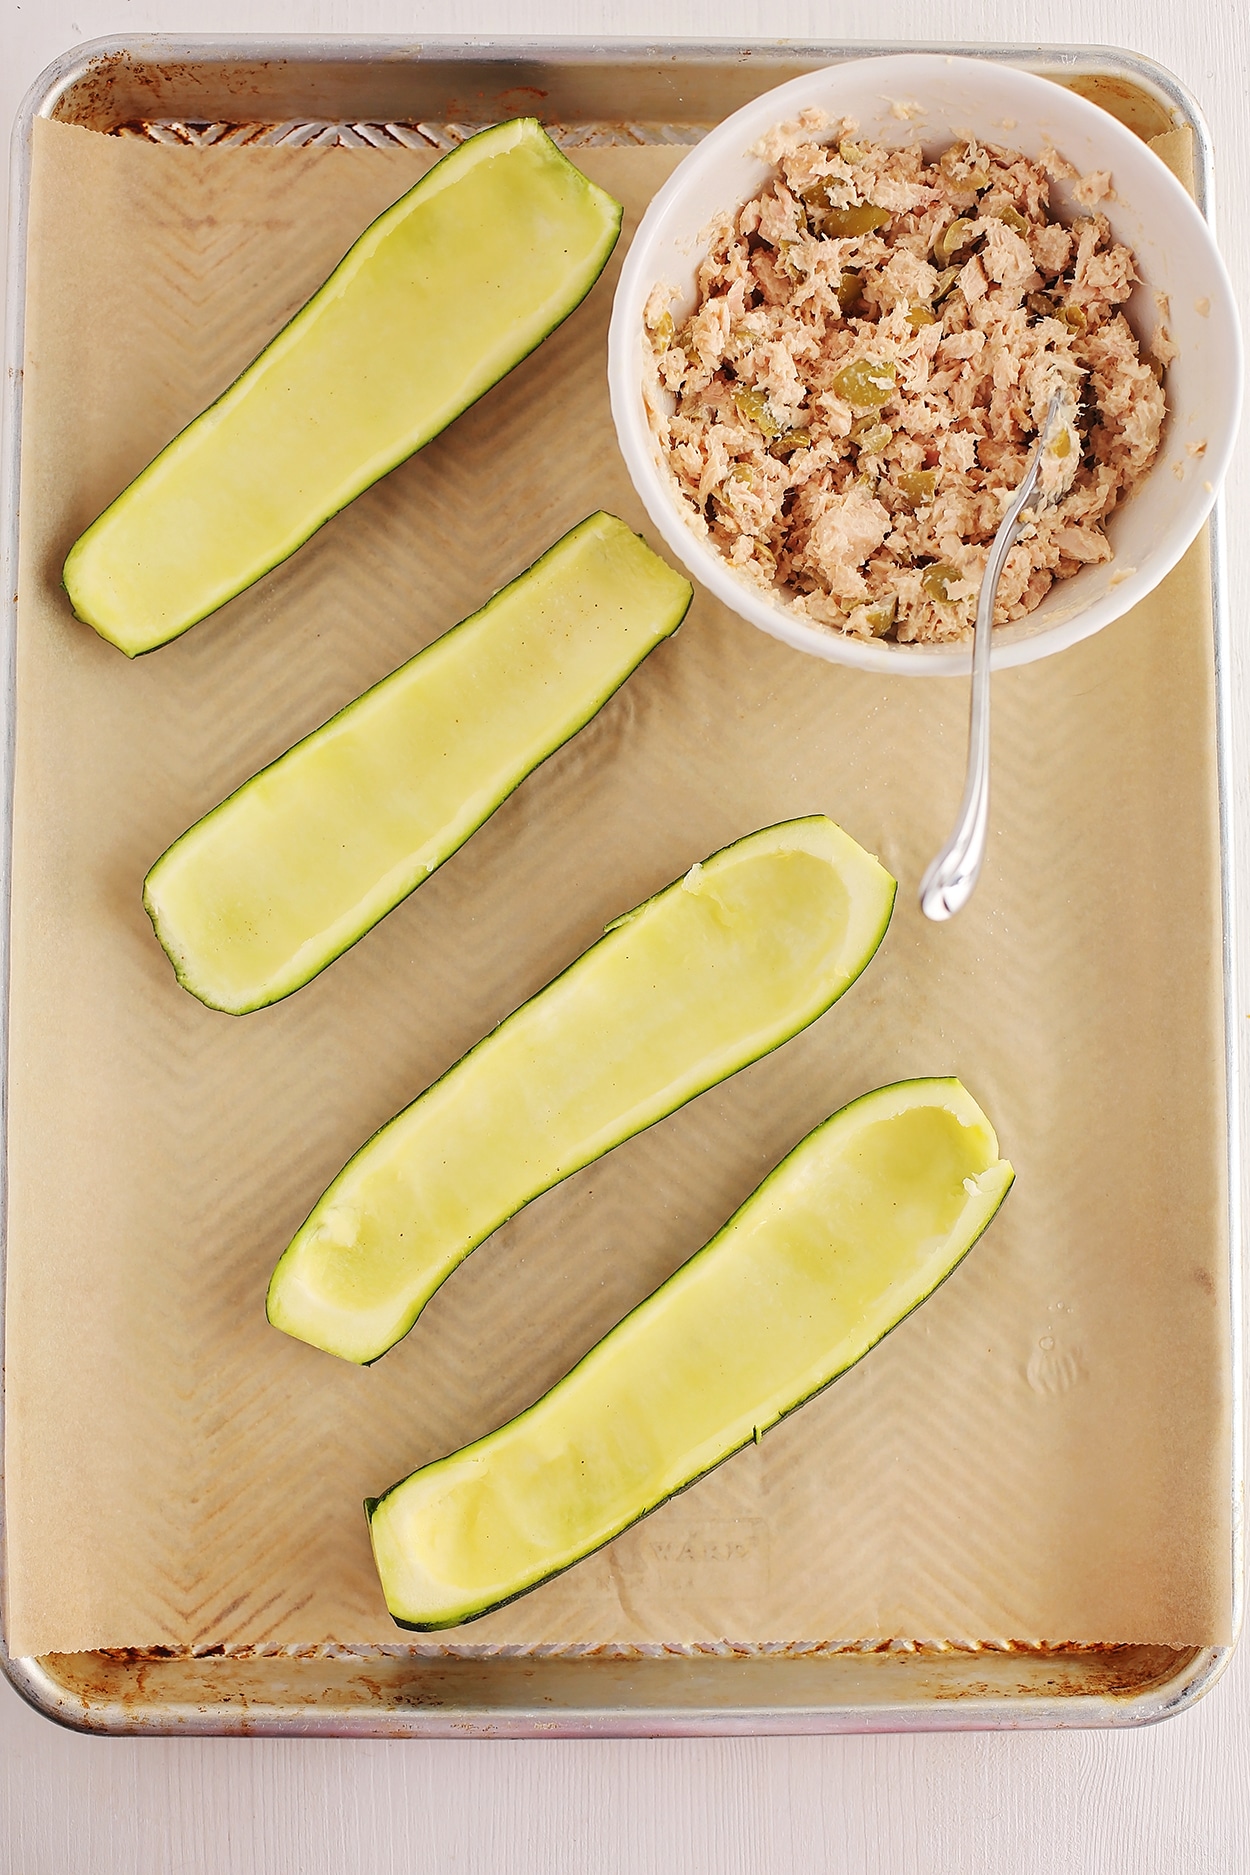 zucchini with scooped out inside ready to be filled with tuna